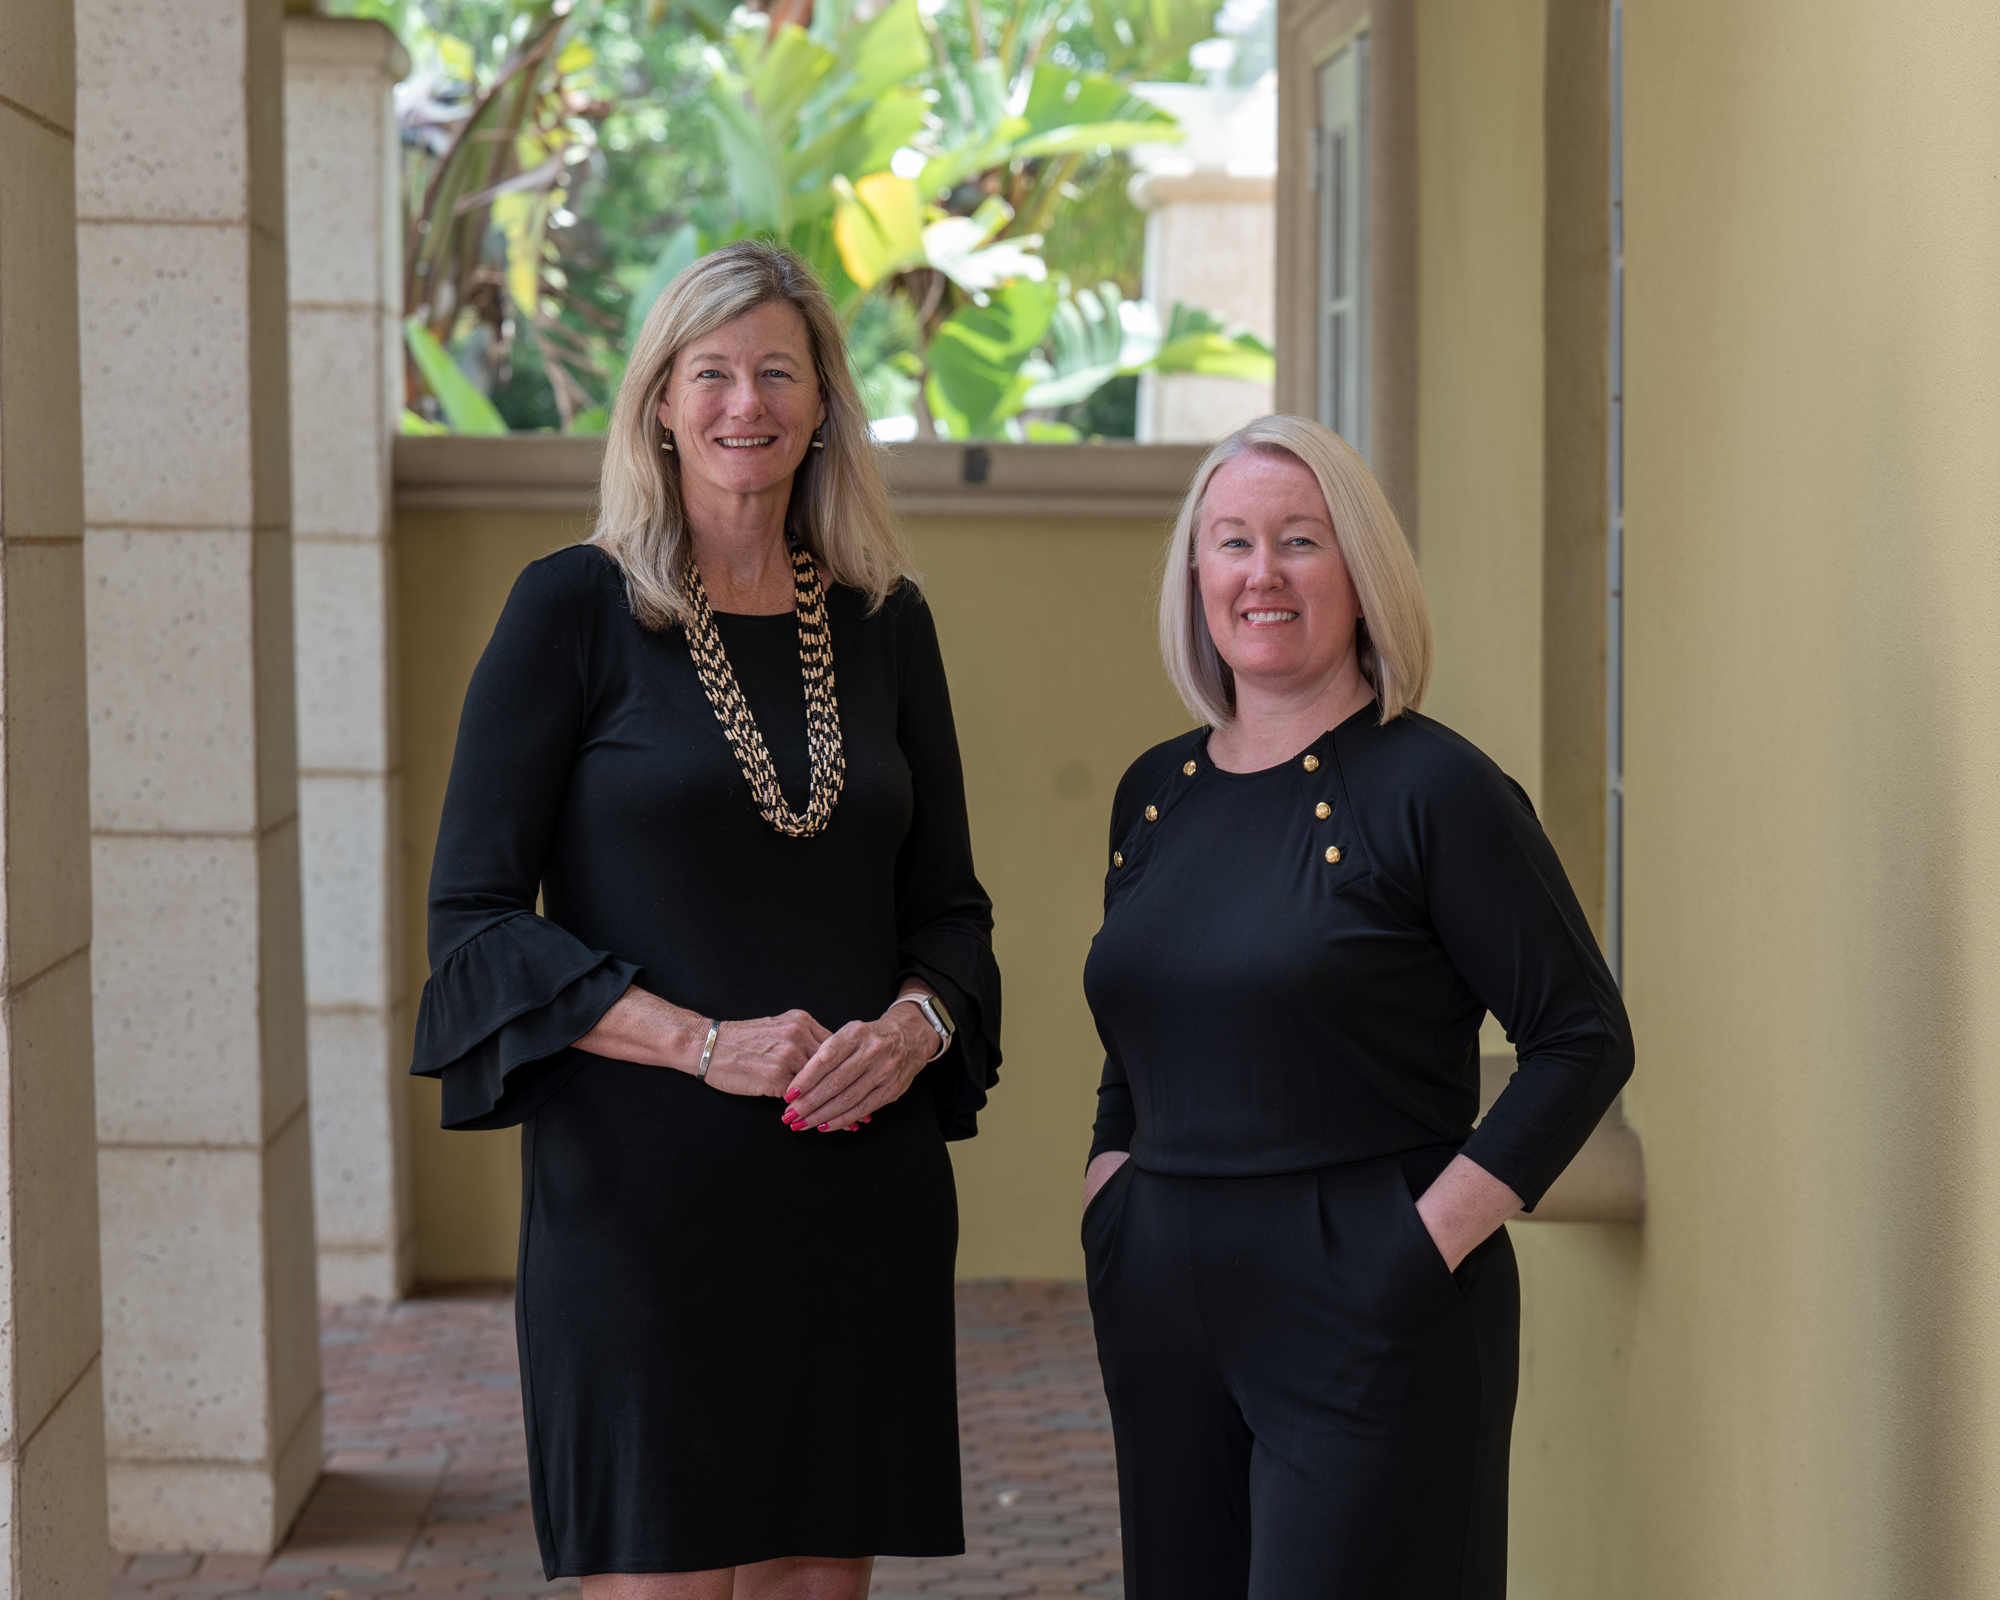 Laura Spencer and Erin Jones have worked together at the Community Foundation of Sarasota for a decade. (Photo by Lori Sax)